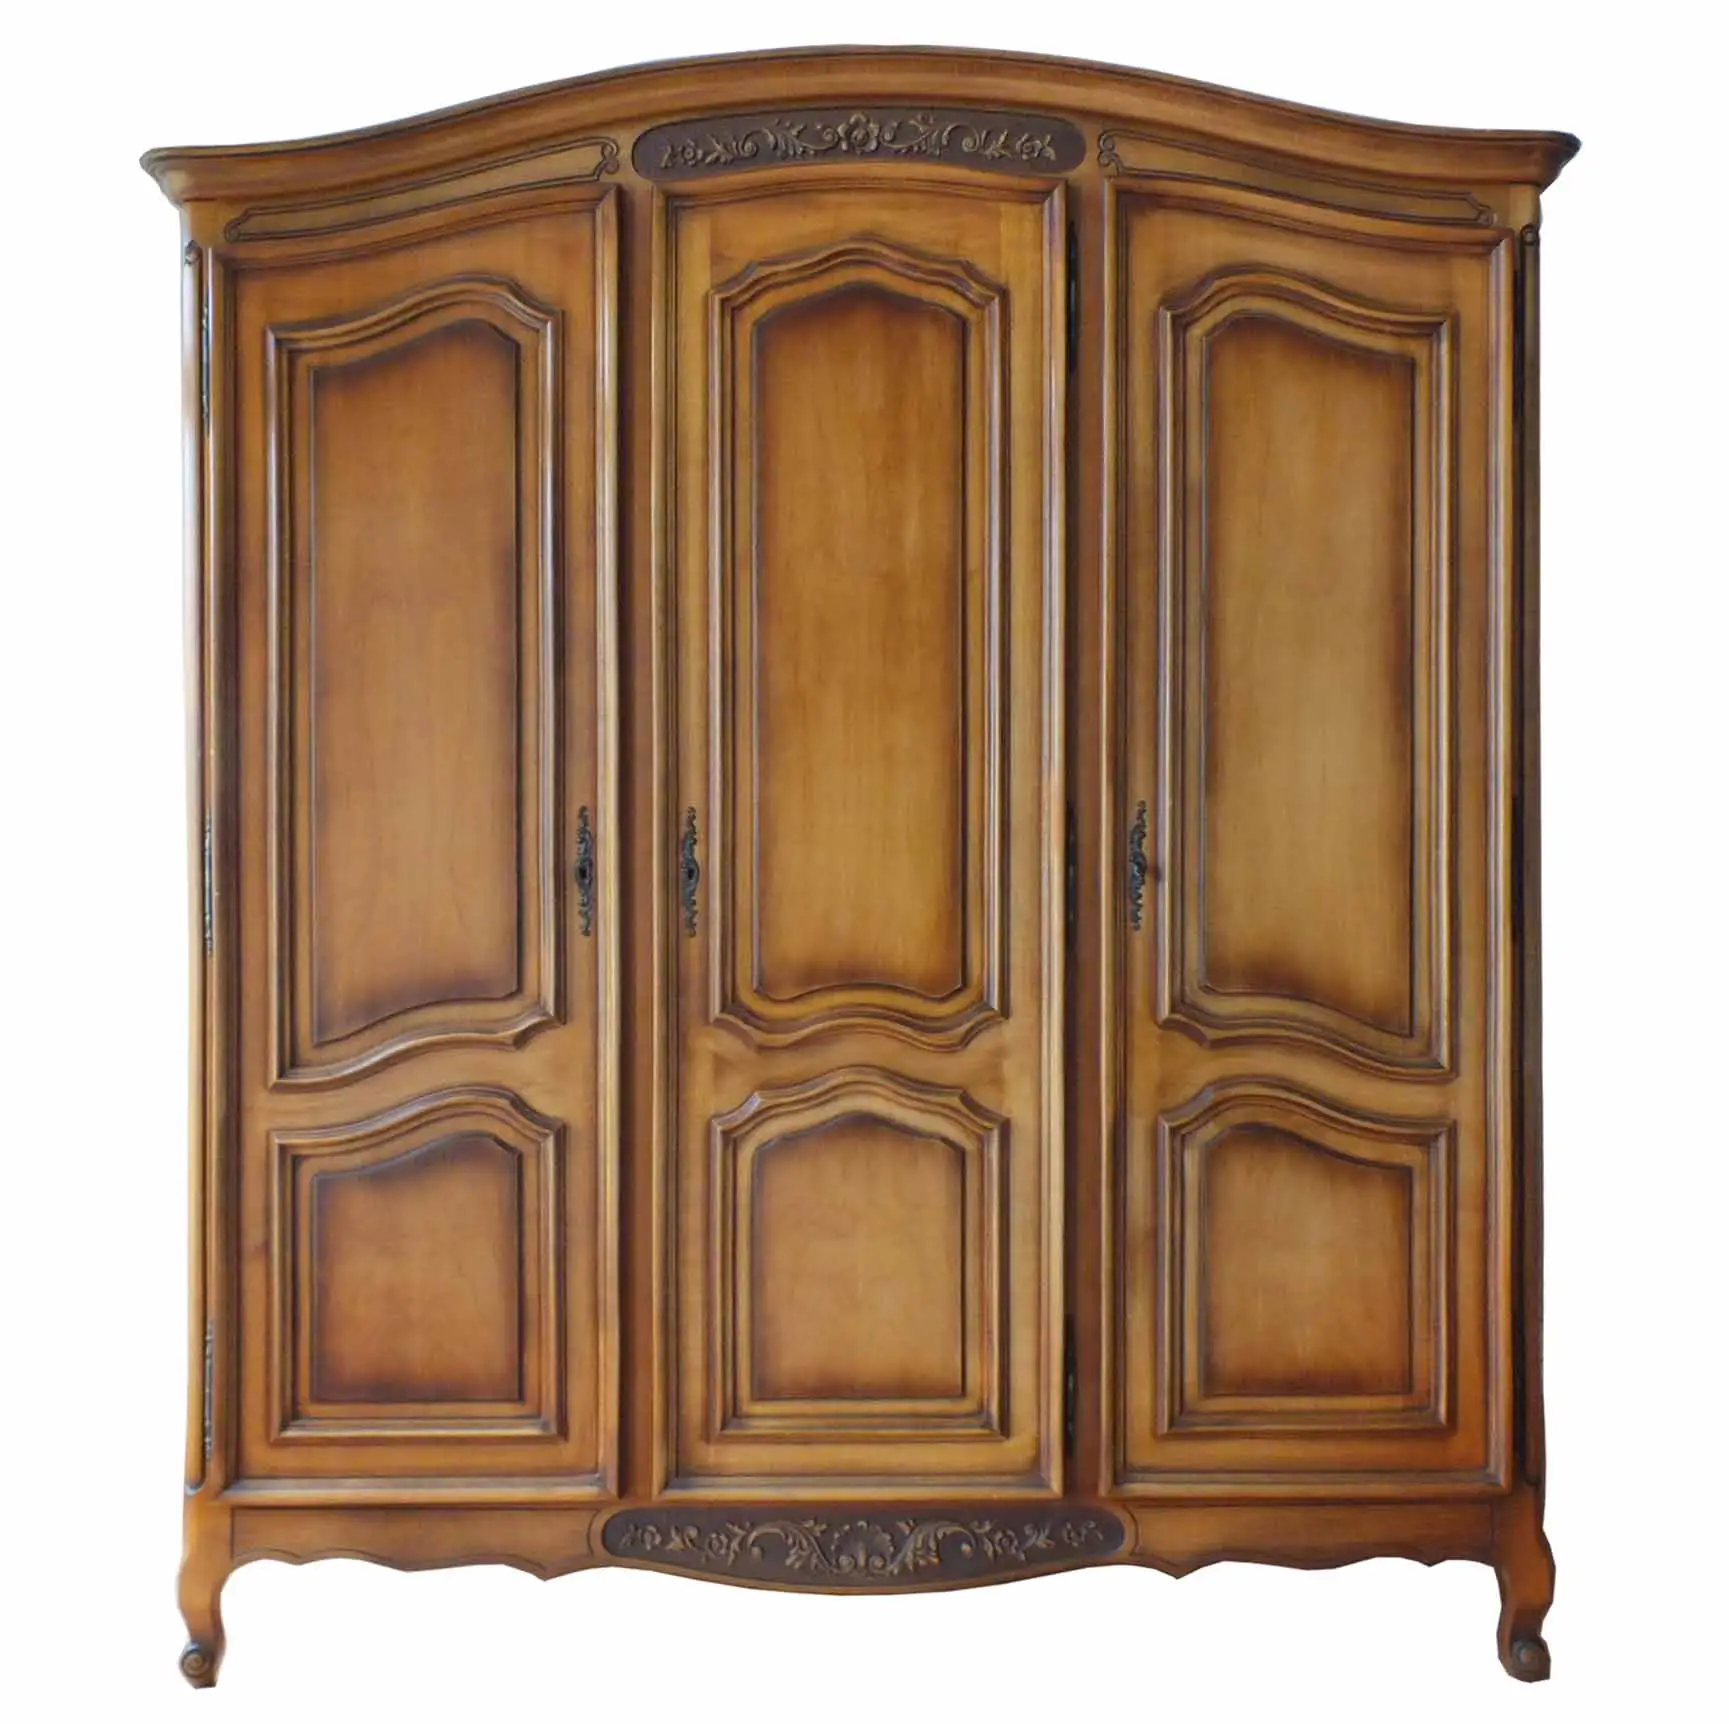 Large French Mahogany Louis XV 3 doors Armoire bedroom wooden Wardrobe furniture